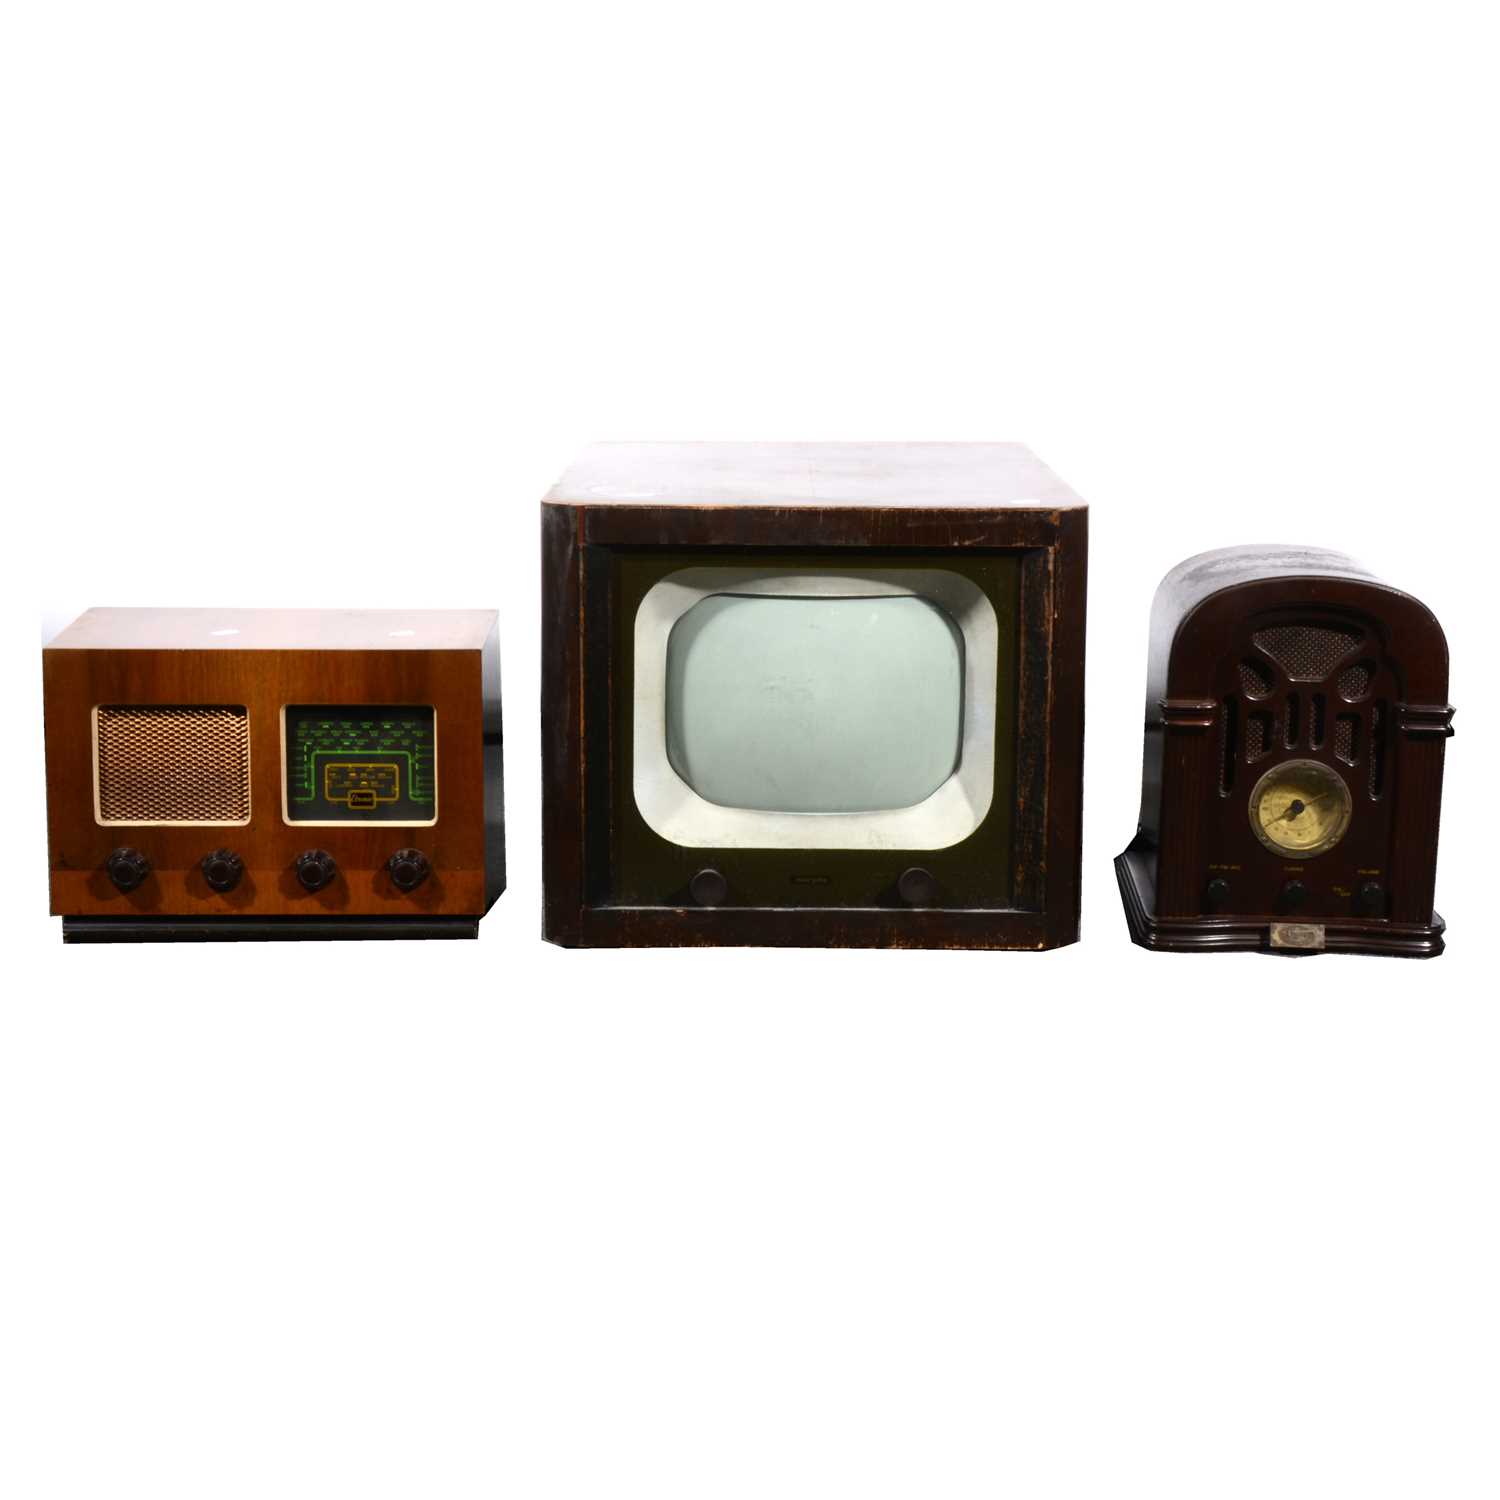 Lot 153 - A vintage Murphy type V150/B television; Etronic radio, and another vintage radio